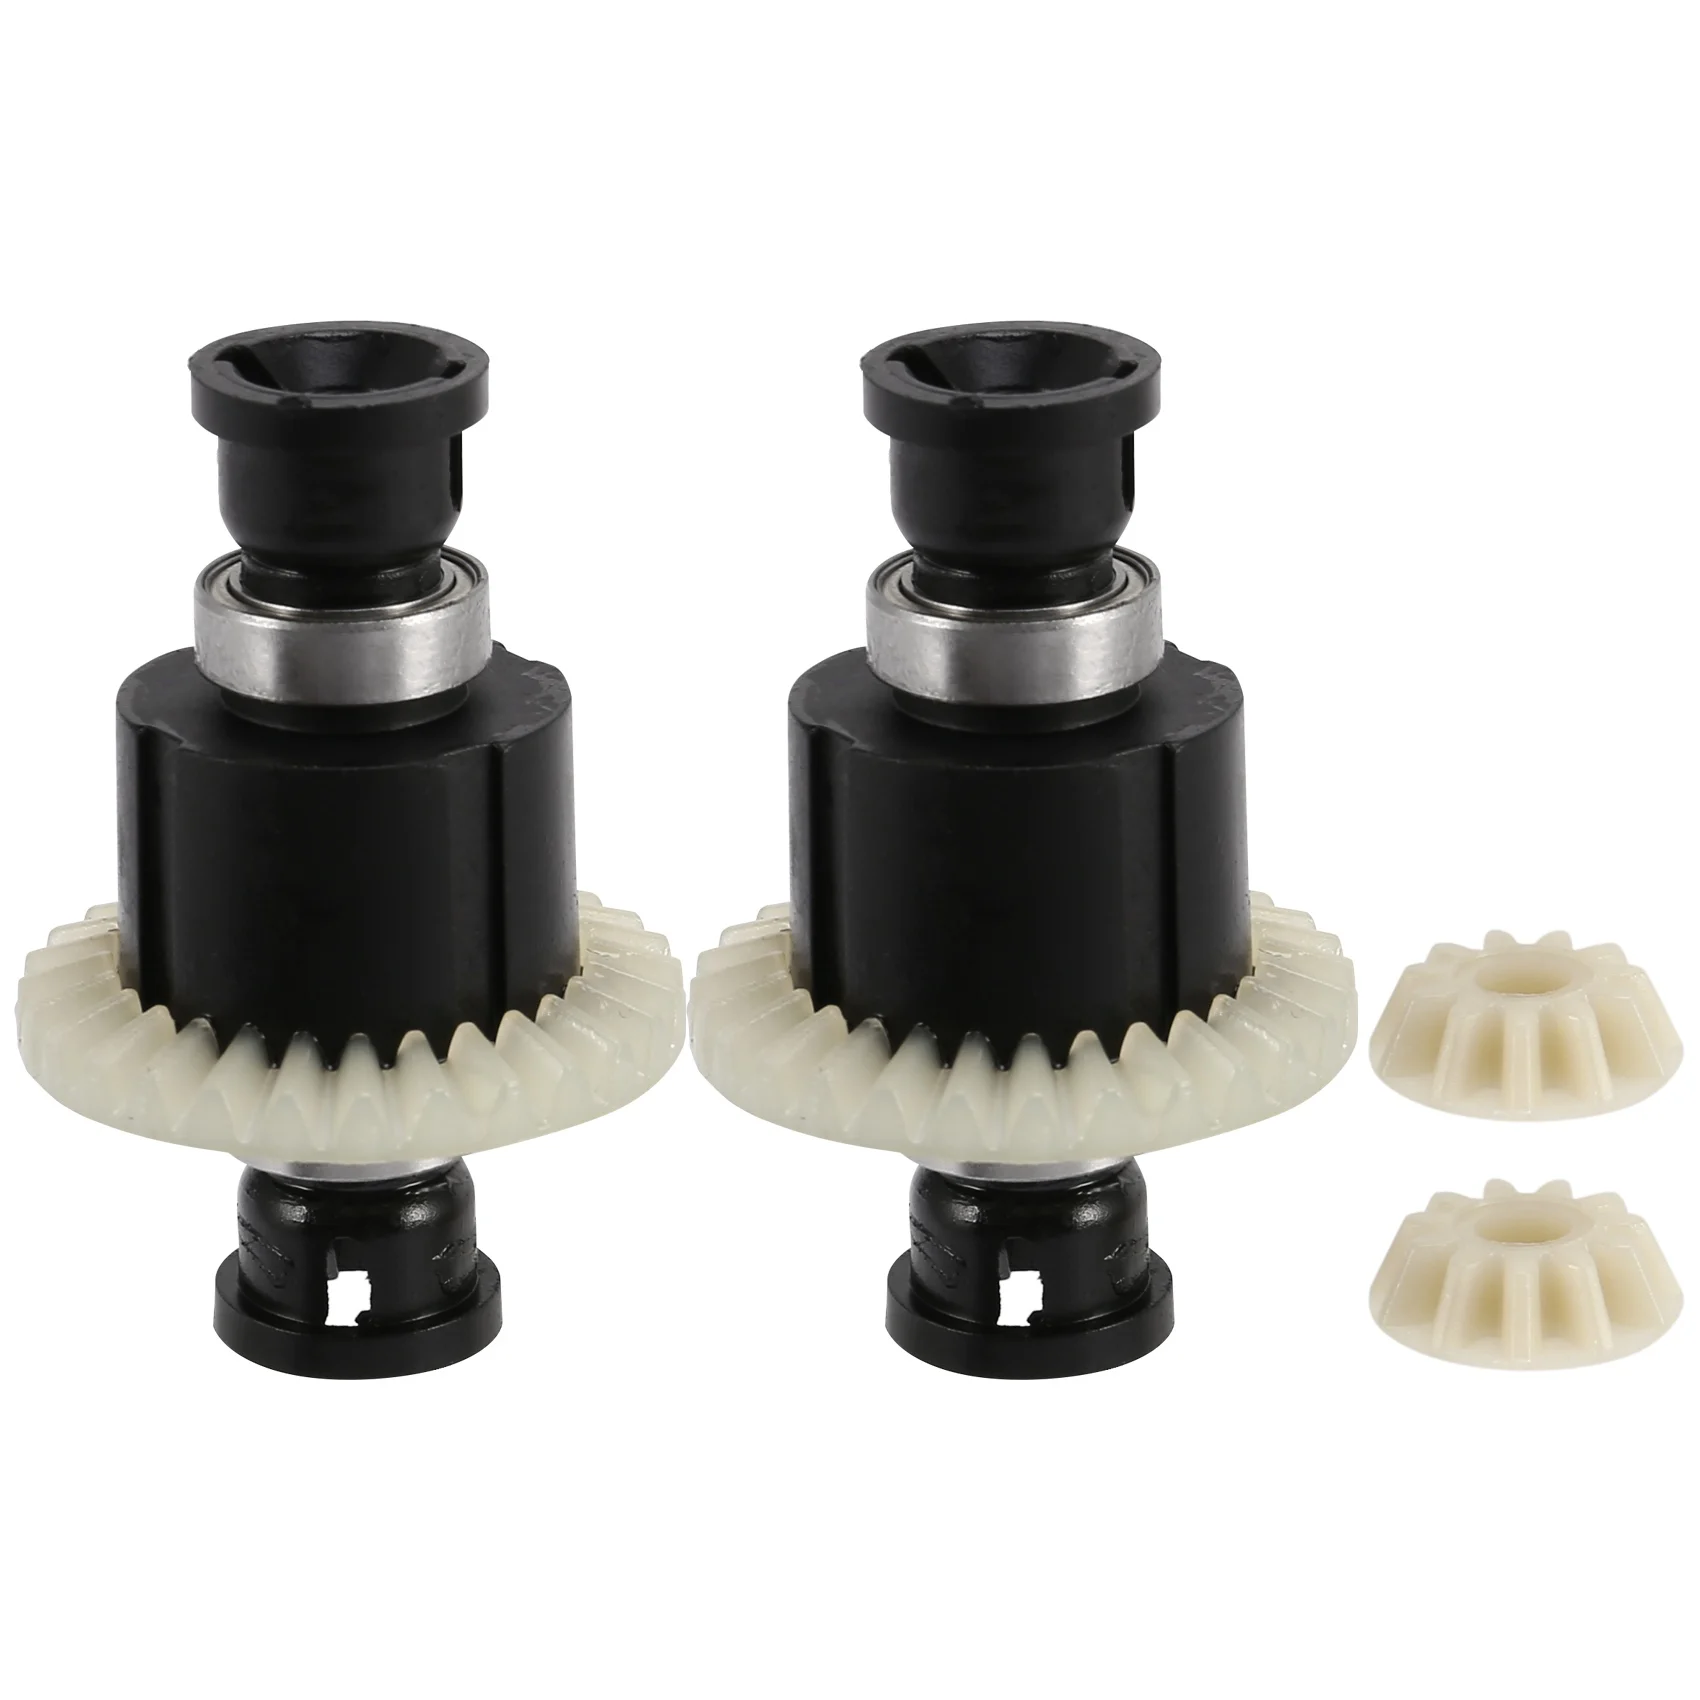 

2Pcs RC Car Differential Assembly for SG 1603 SG 1604 SG1603 SG1604 1/16 RC Car Spare Parts Accessories